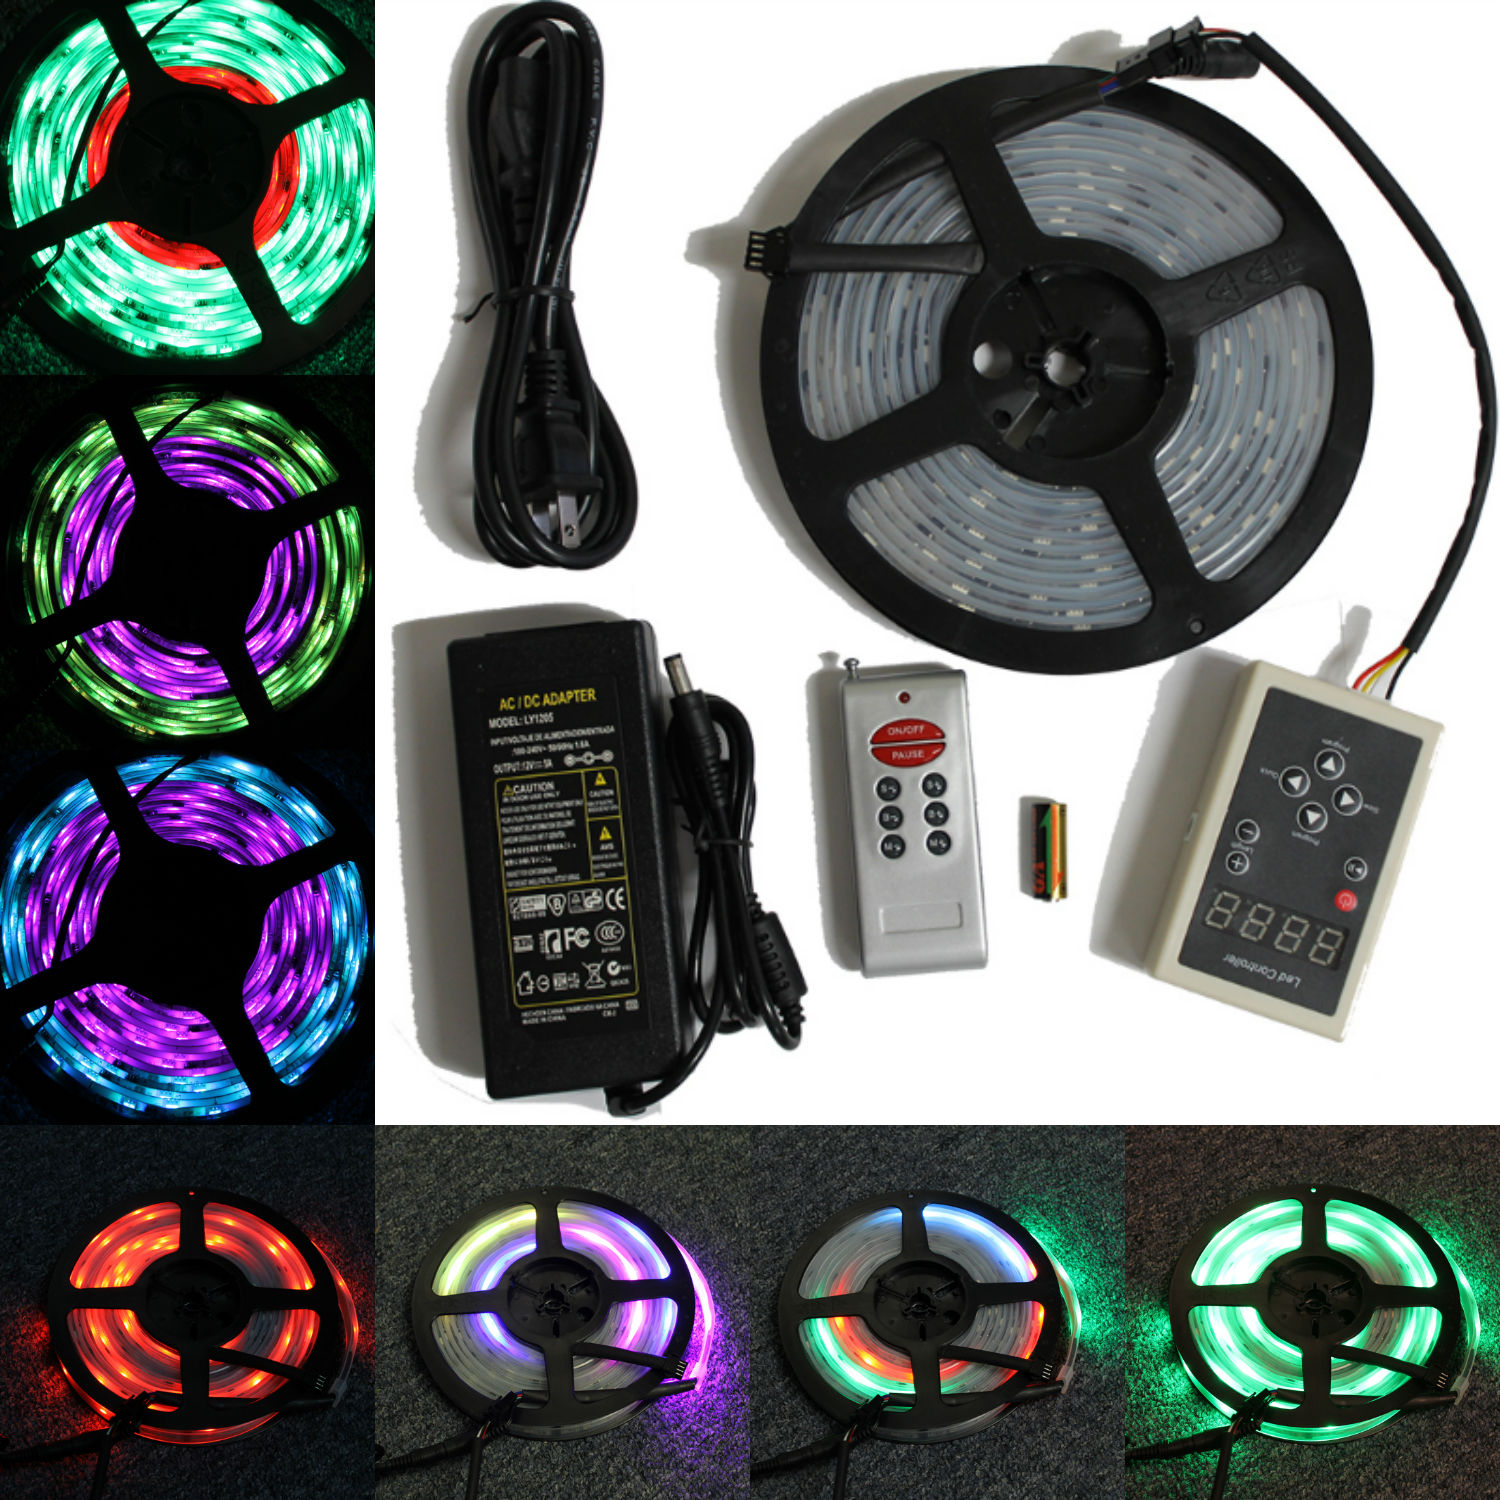 LED4everything (TM) 5M 16.4ft RGB 133 Dream color 5050 6803 IC Waterproof LED Strip + Remote + Power